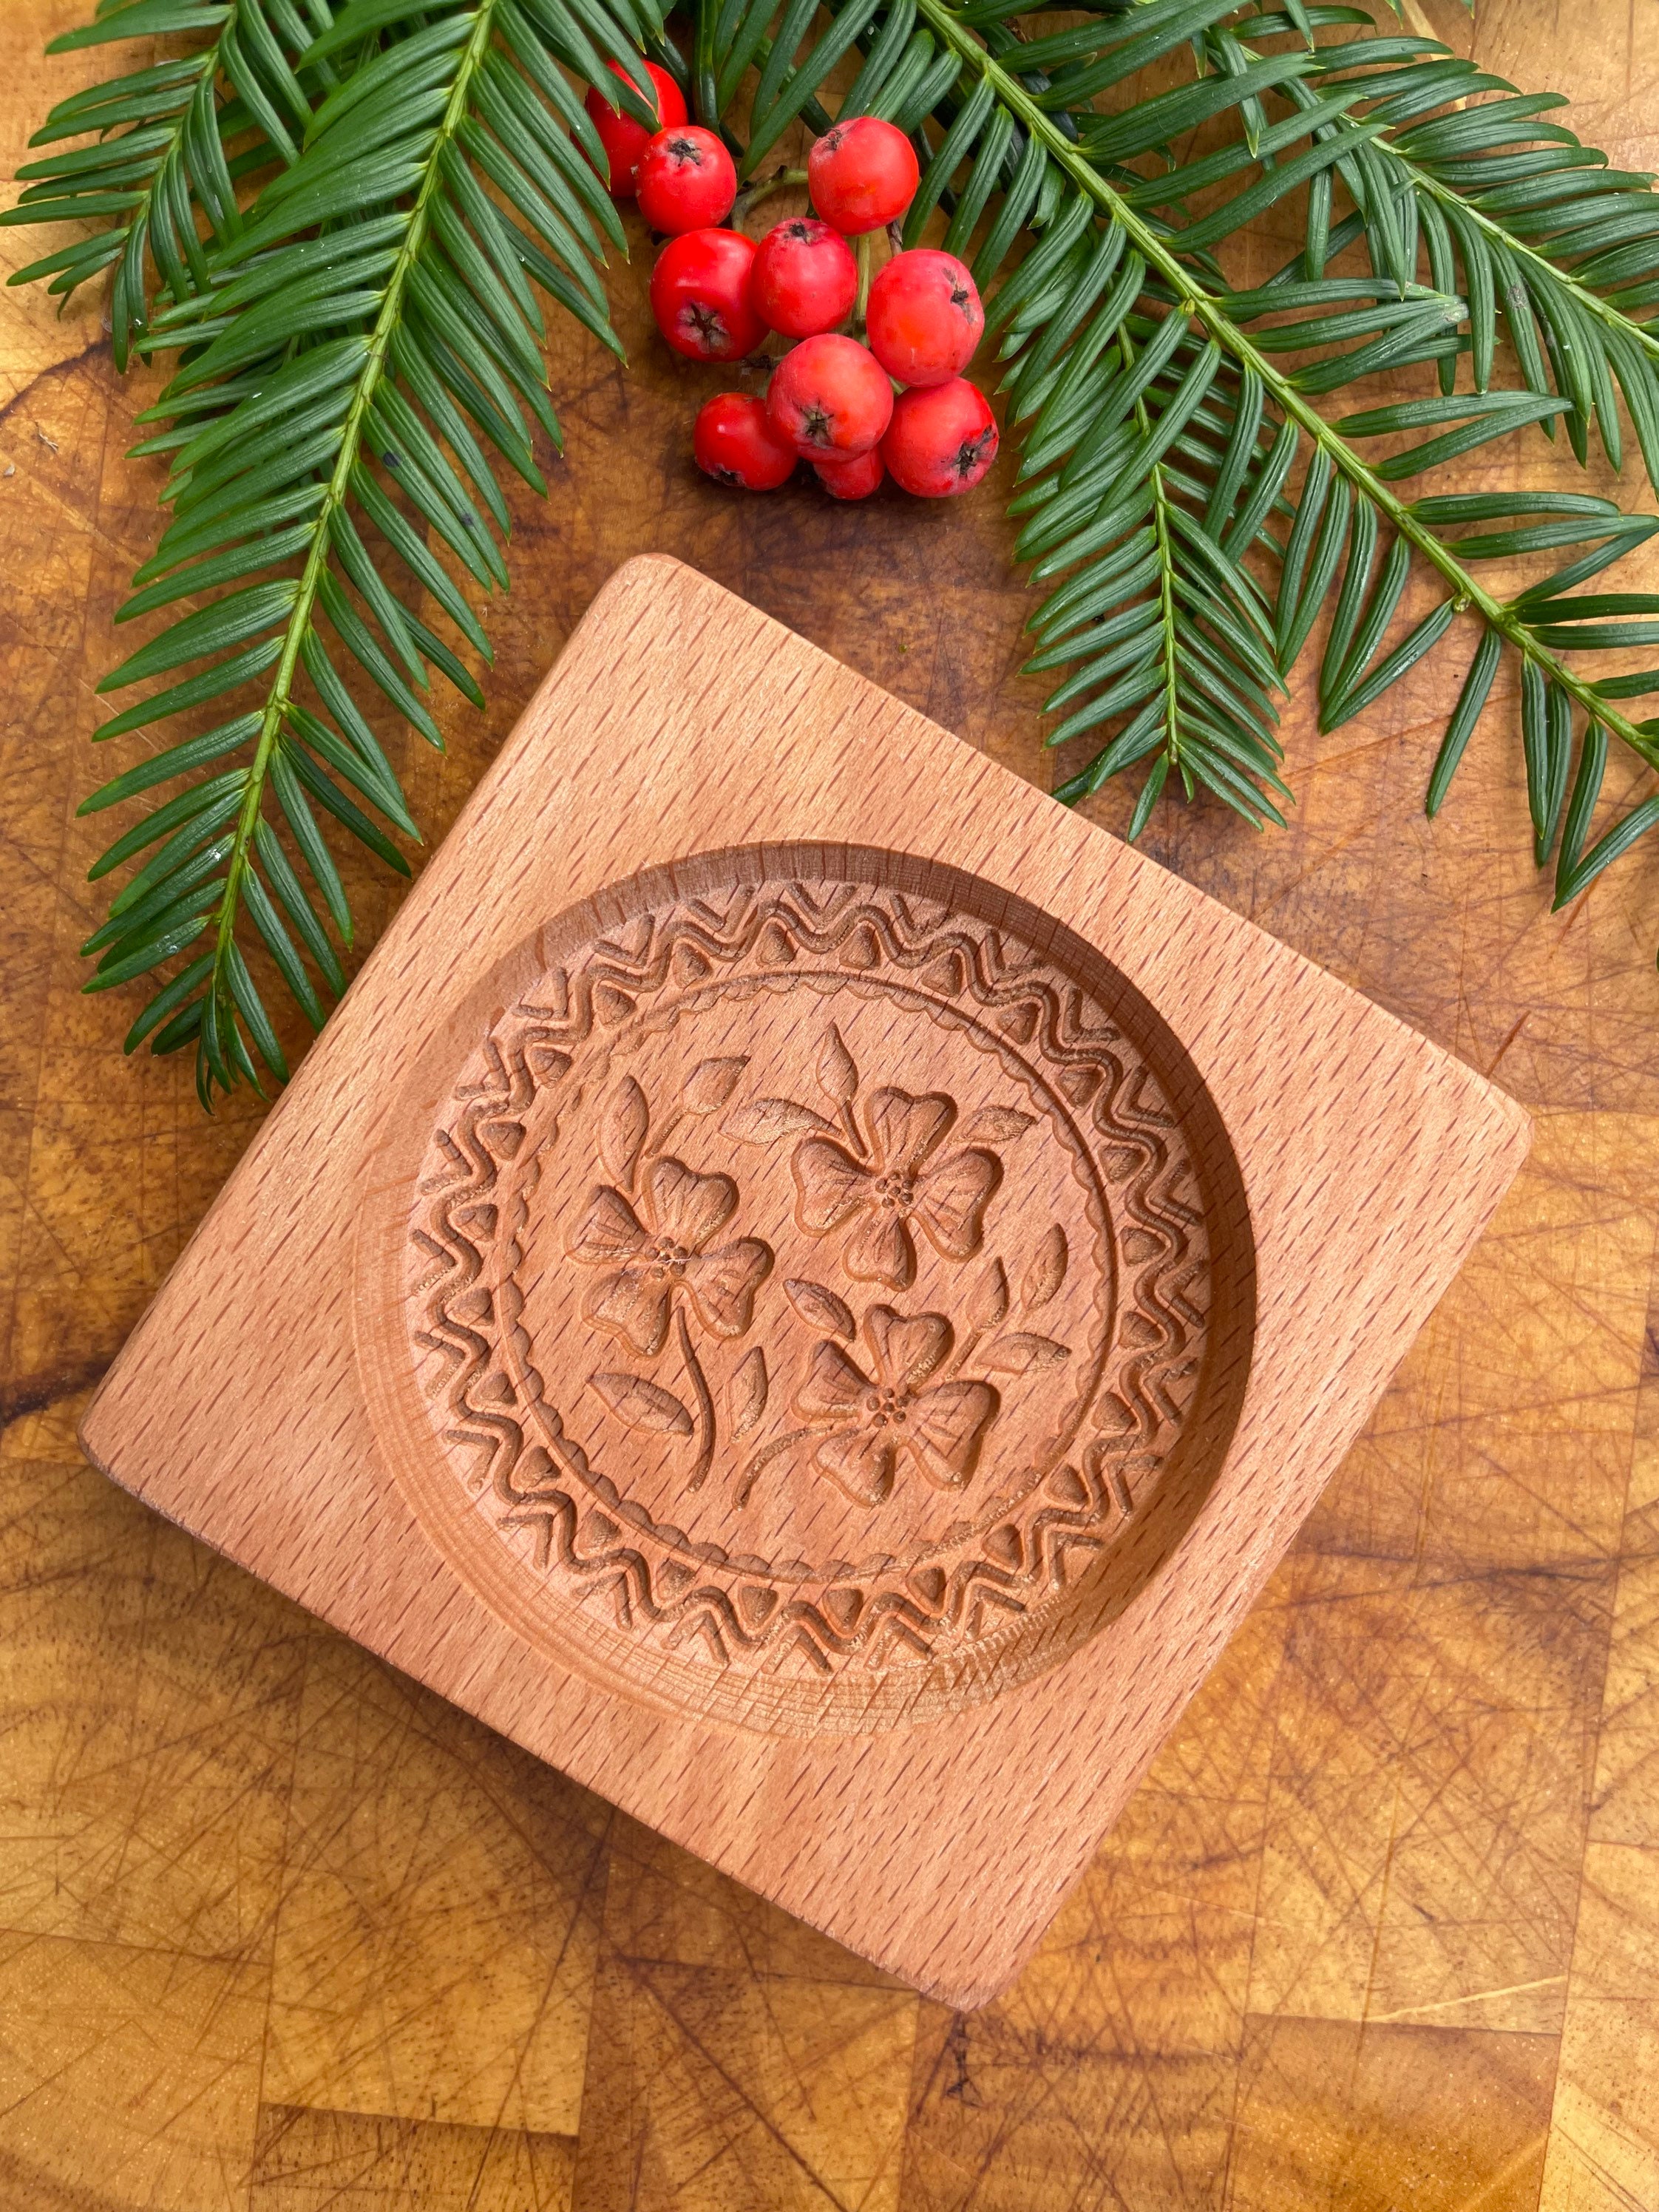 Raspberry Shortbread Mold, Carved Wood Gingerbread Cookie Biscuits Shortbread  Mold, Wooden Cookie Mold With Good Wishes, Cookie Stamp Embossing Mould